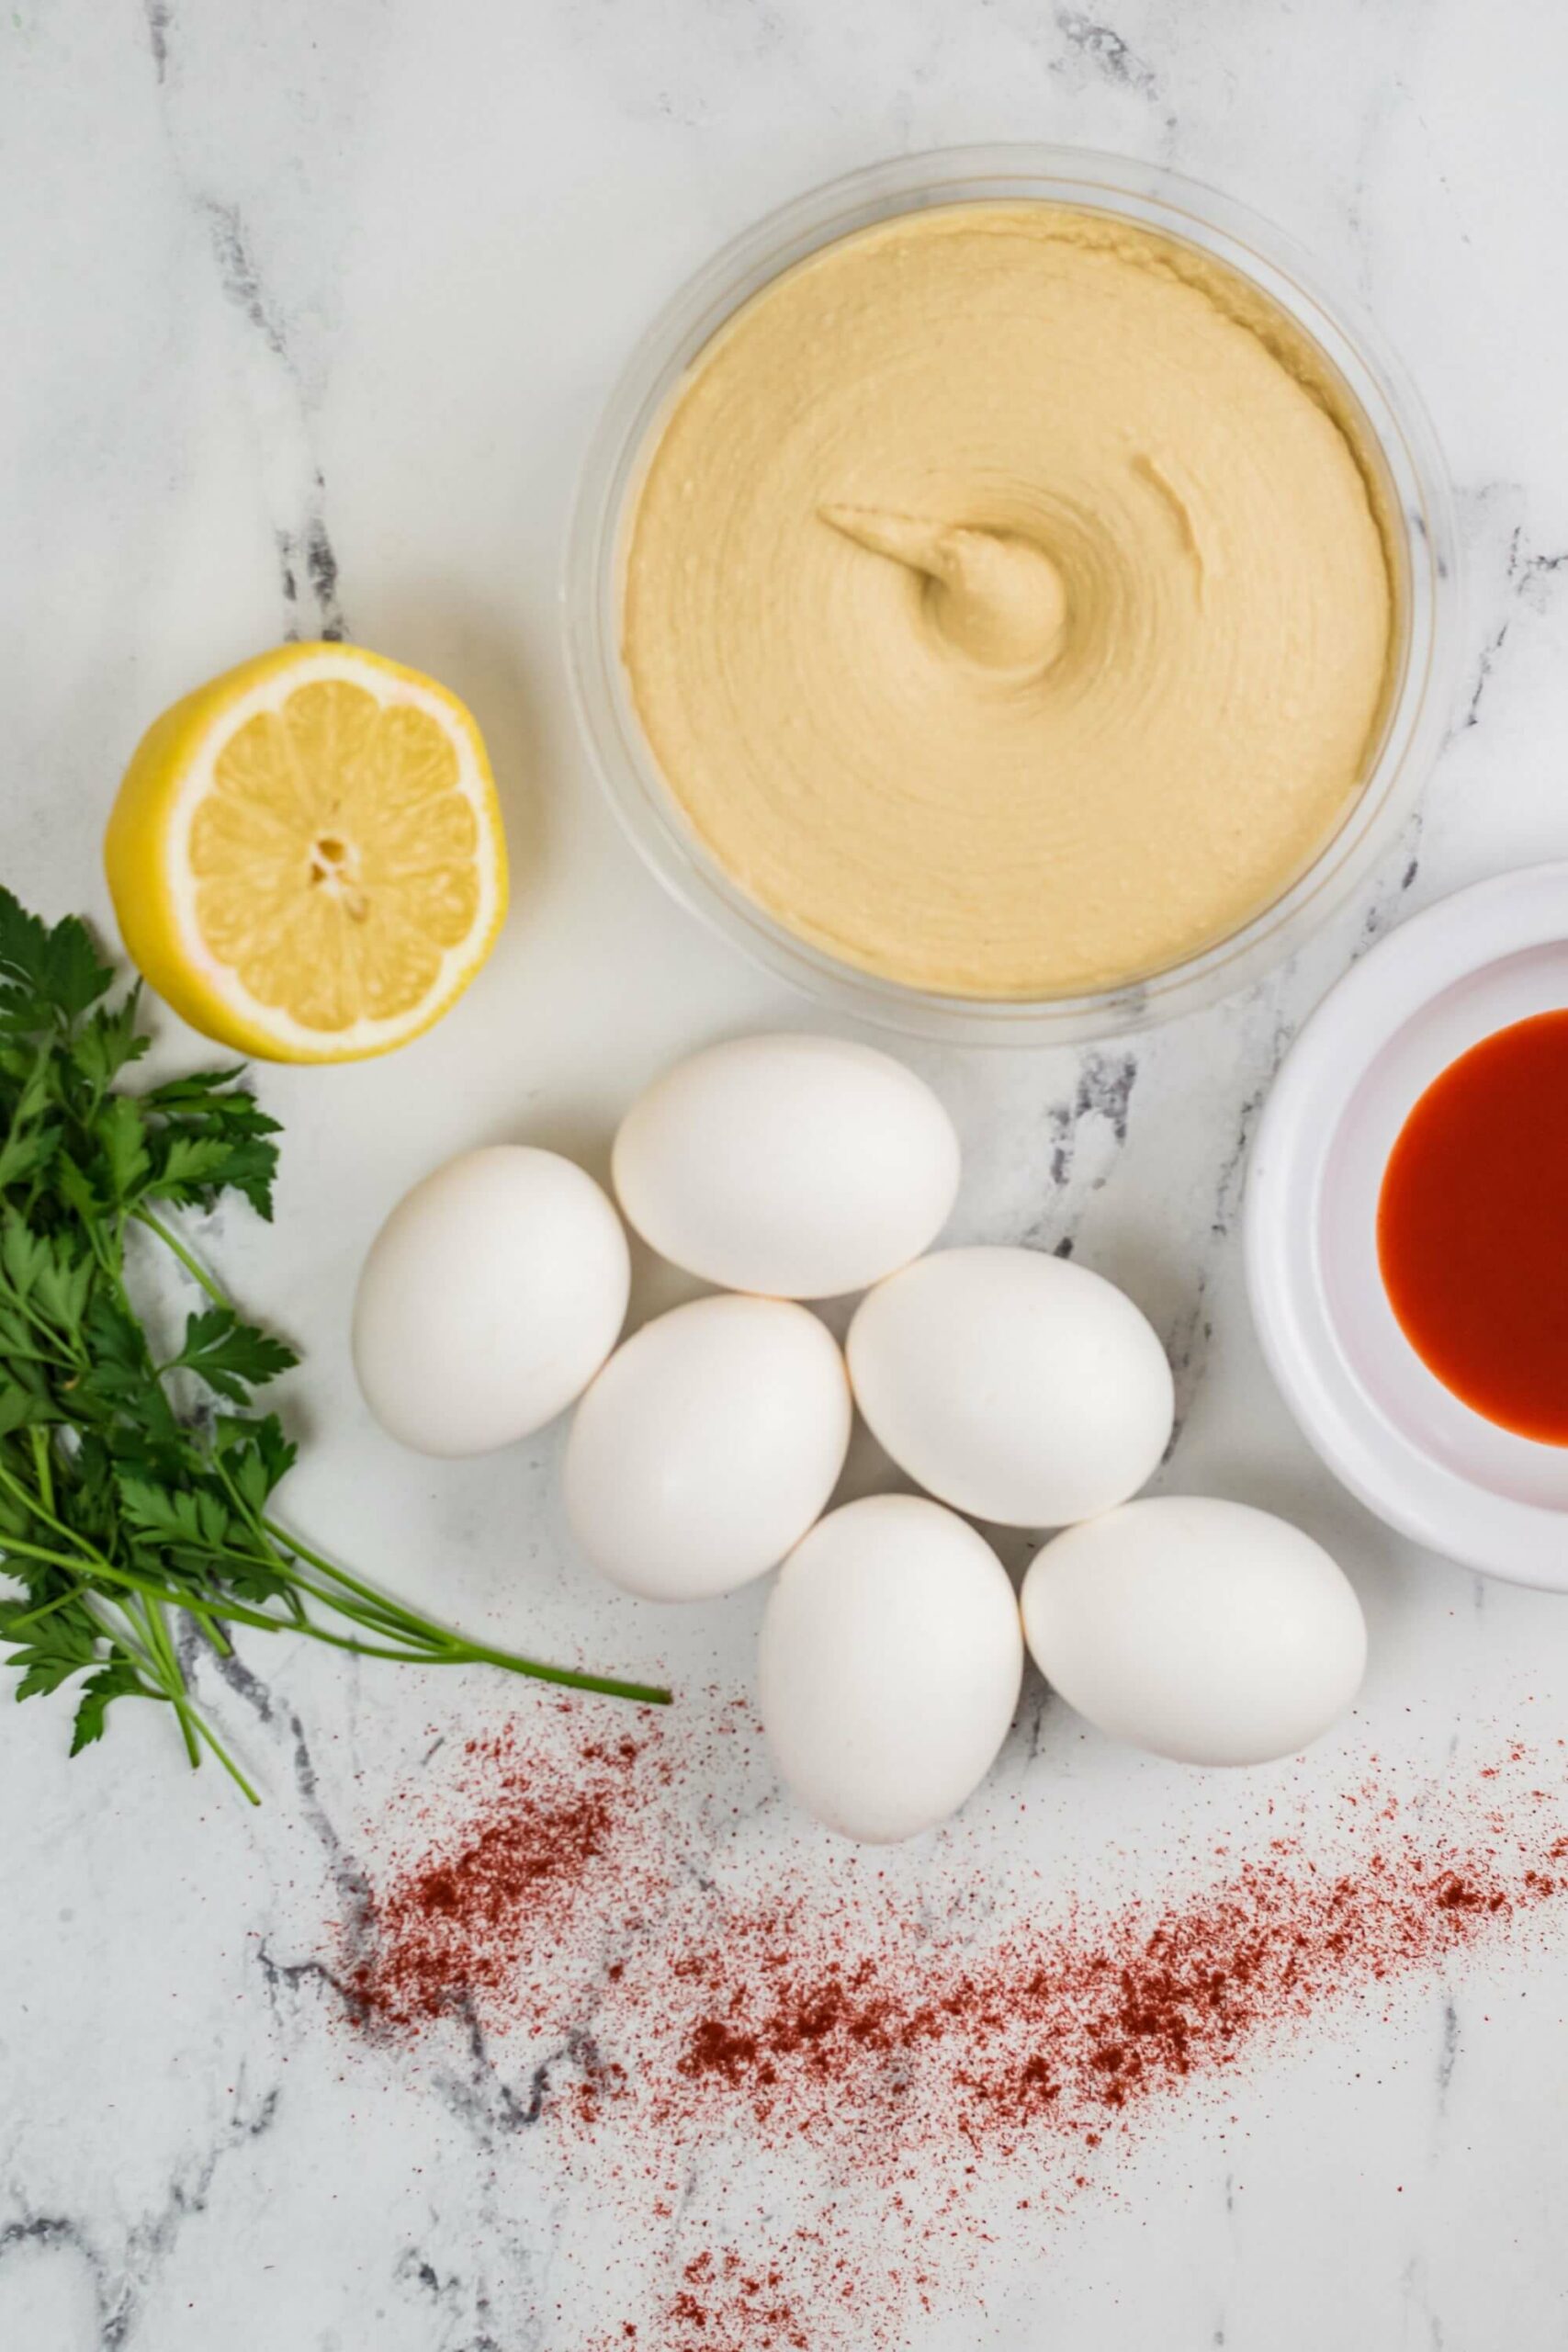 Ingredients for a Million Dollar Deviled Eggs recipe, including eggs, paprika, hot sauce, parsley, lemon, and a bowl of creamy sauce, on a marble surface.